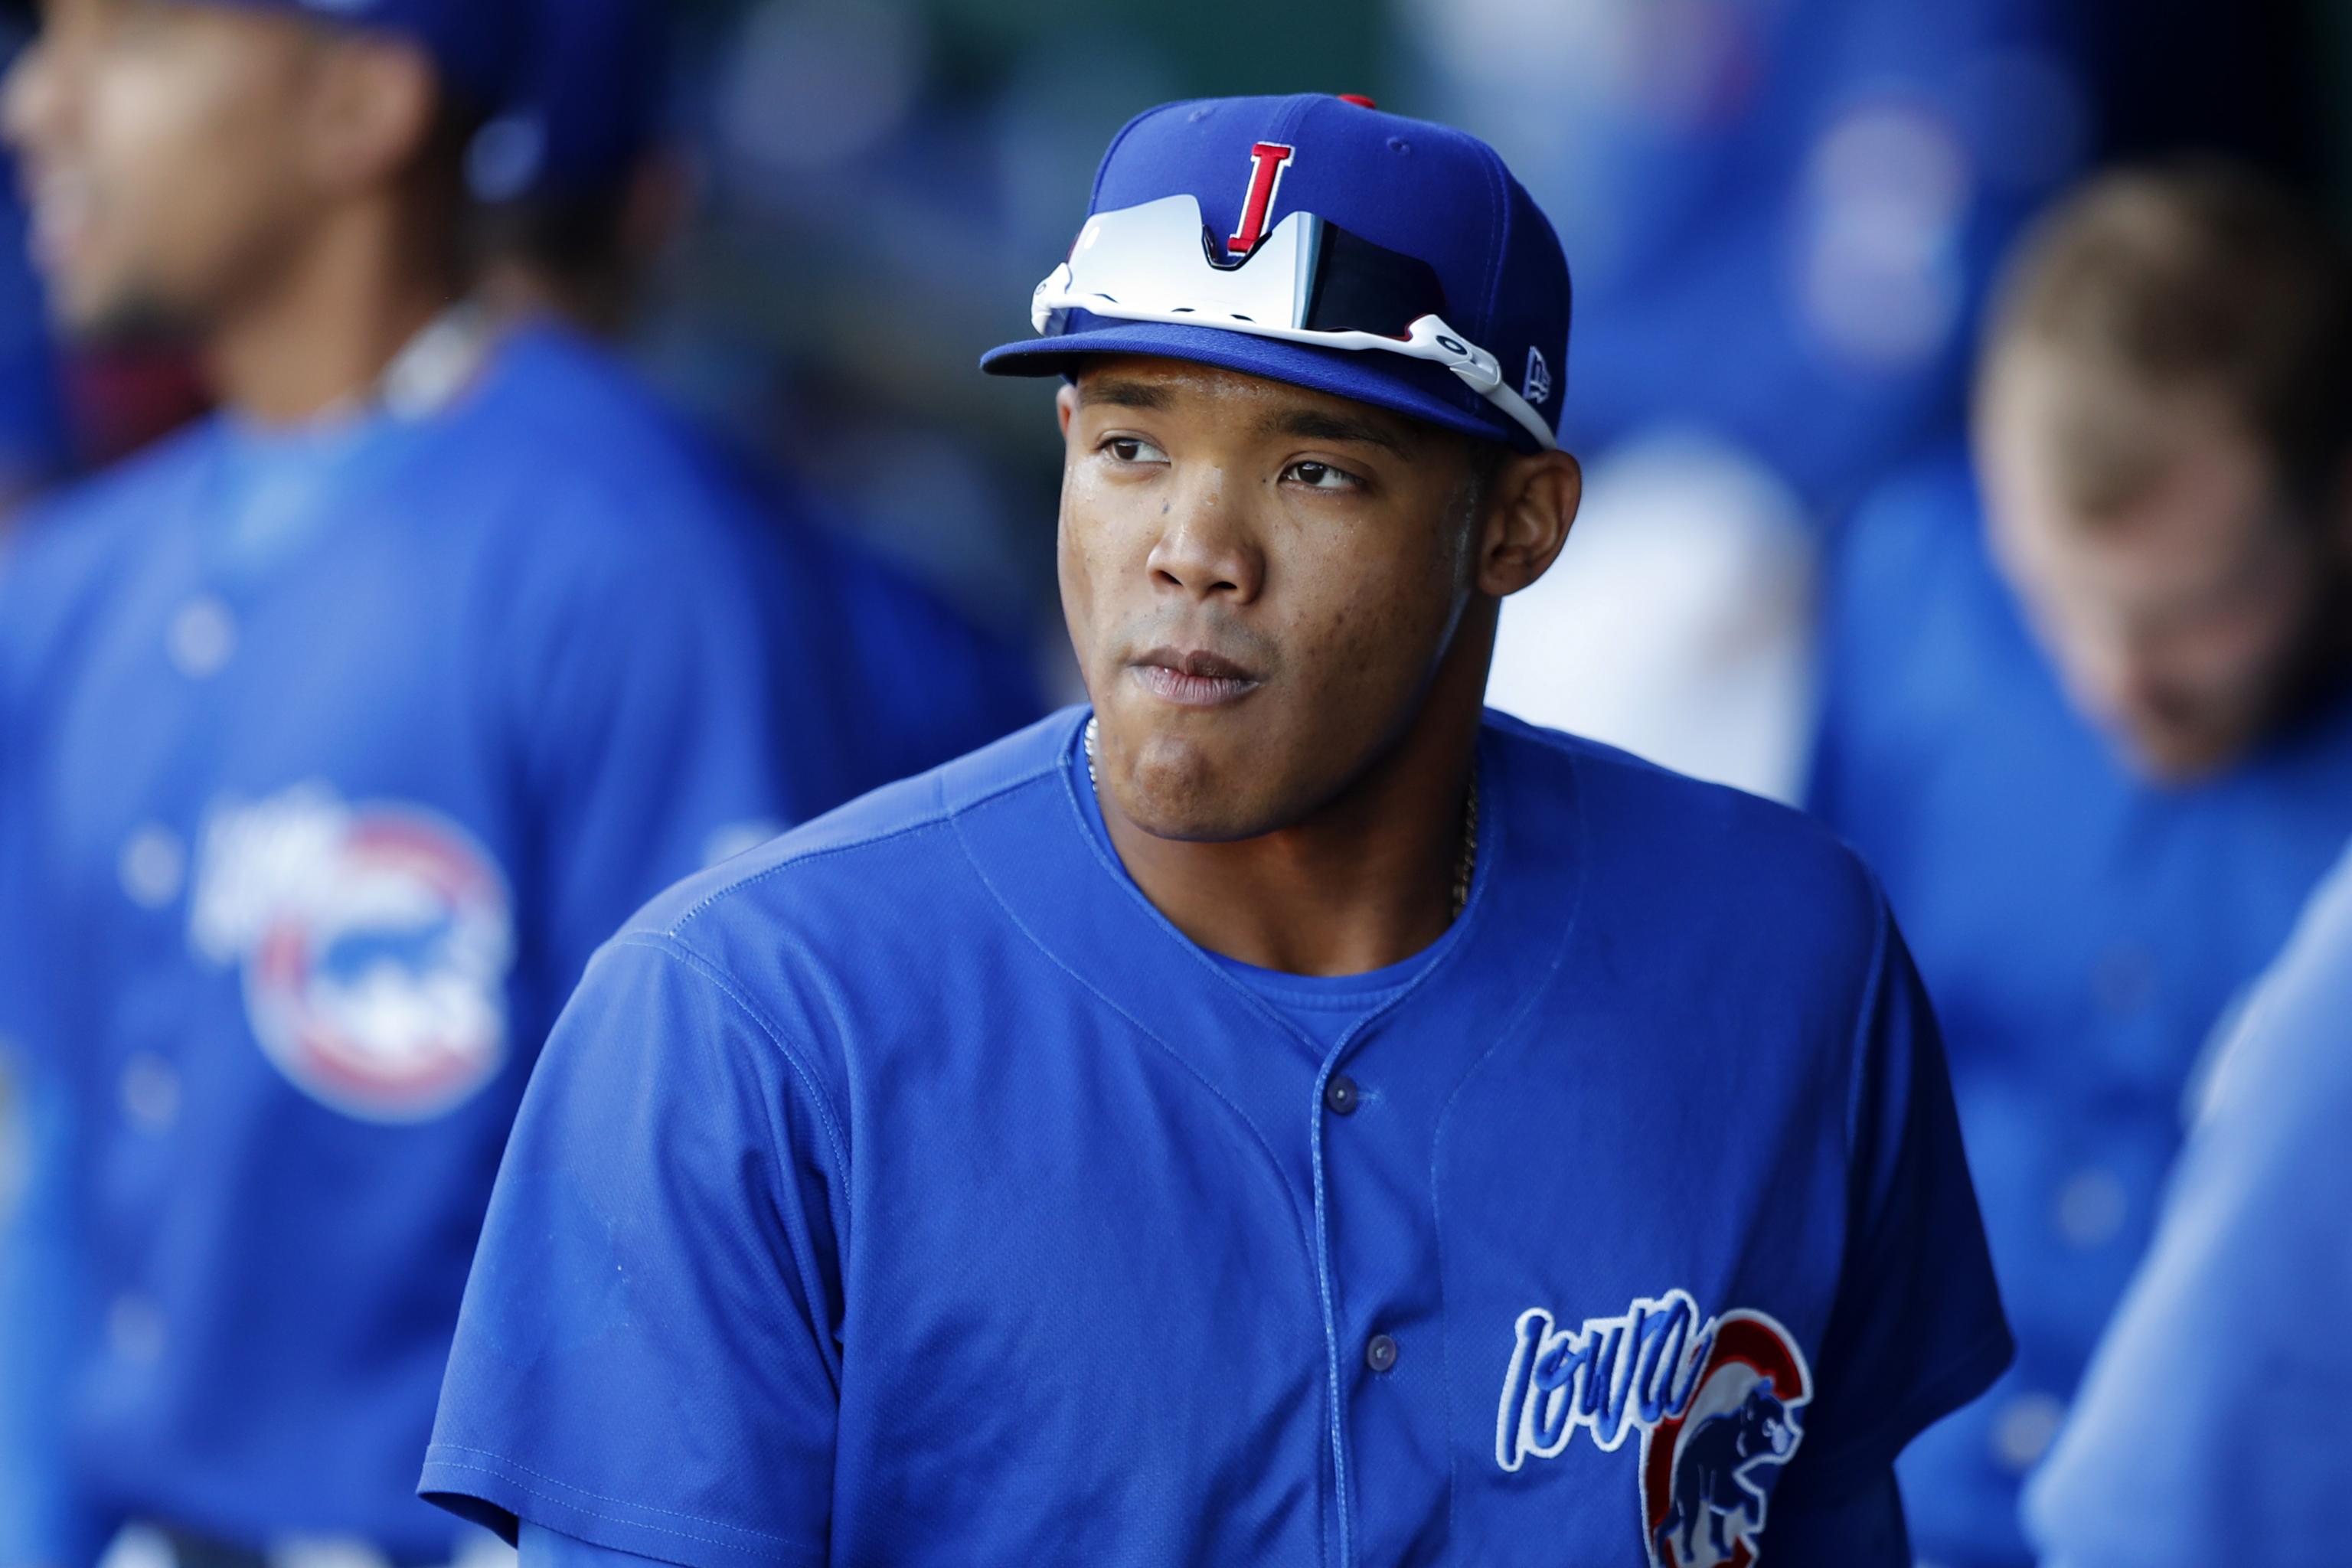 Cubs sign suspended SS Addison Russell for below market value - ABC7 Chicago